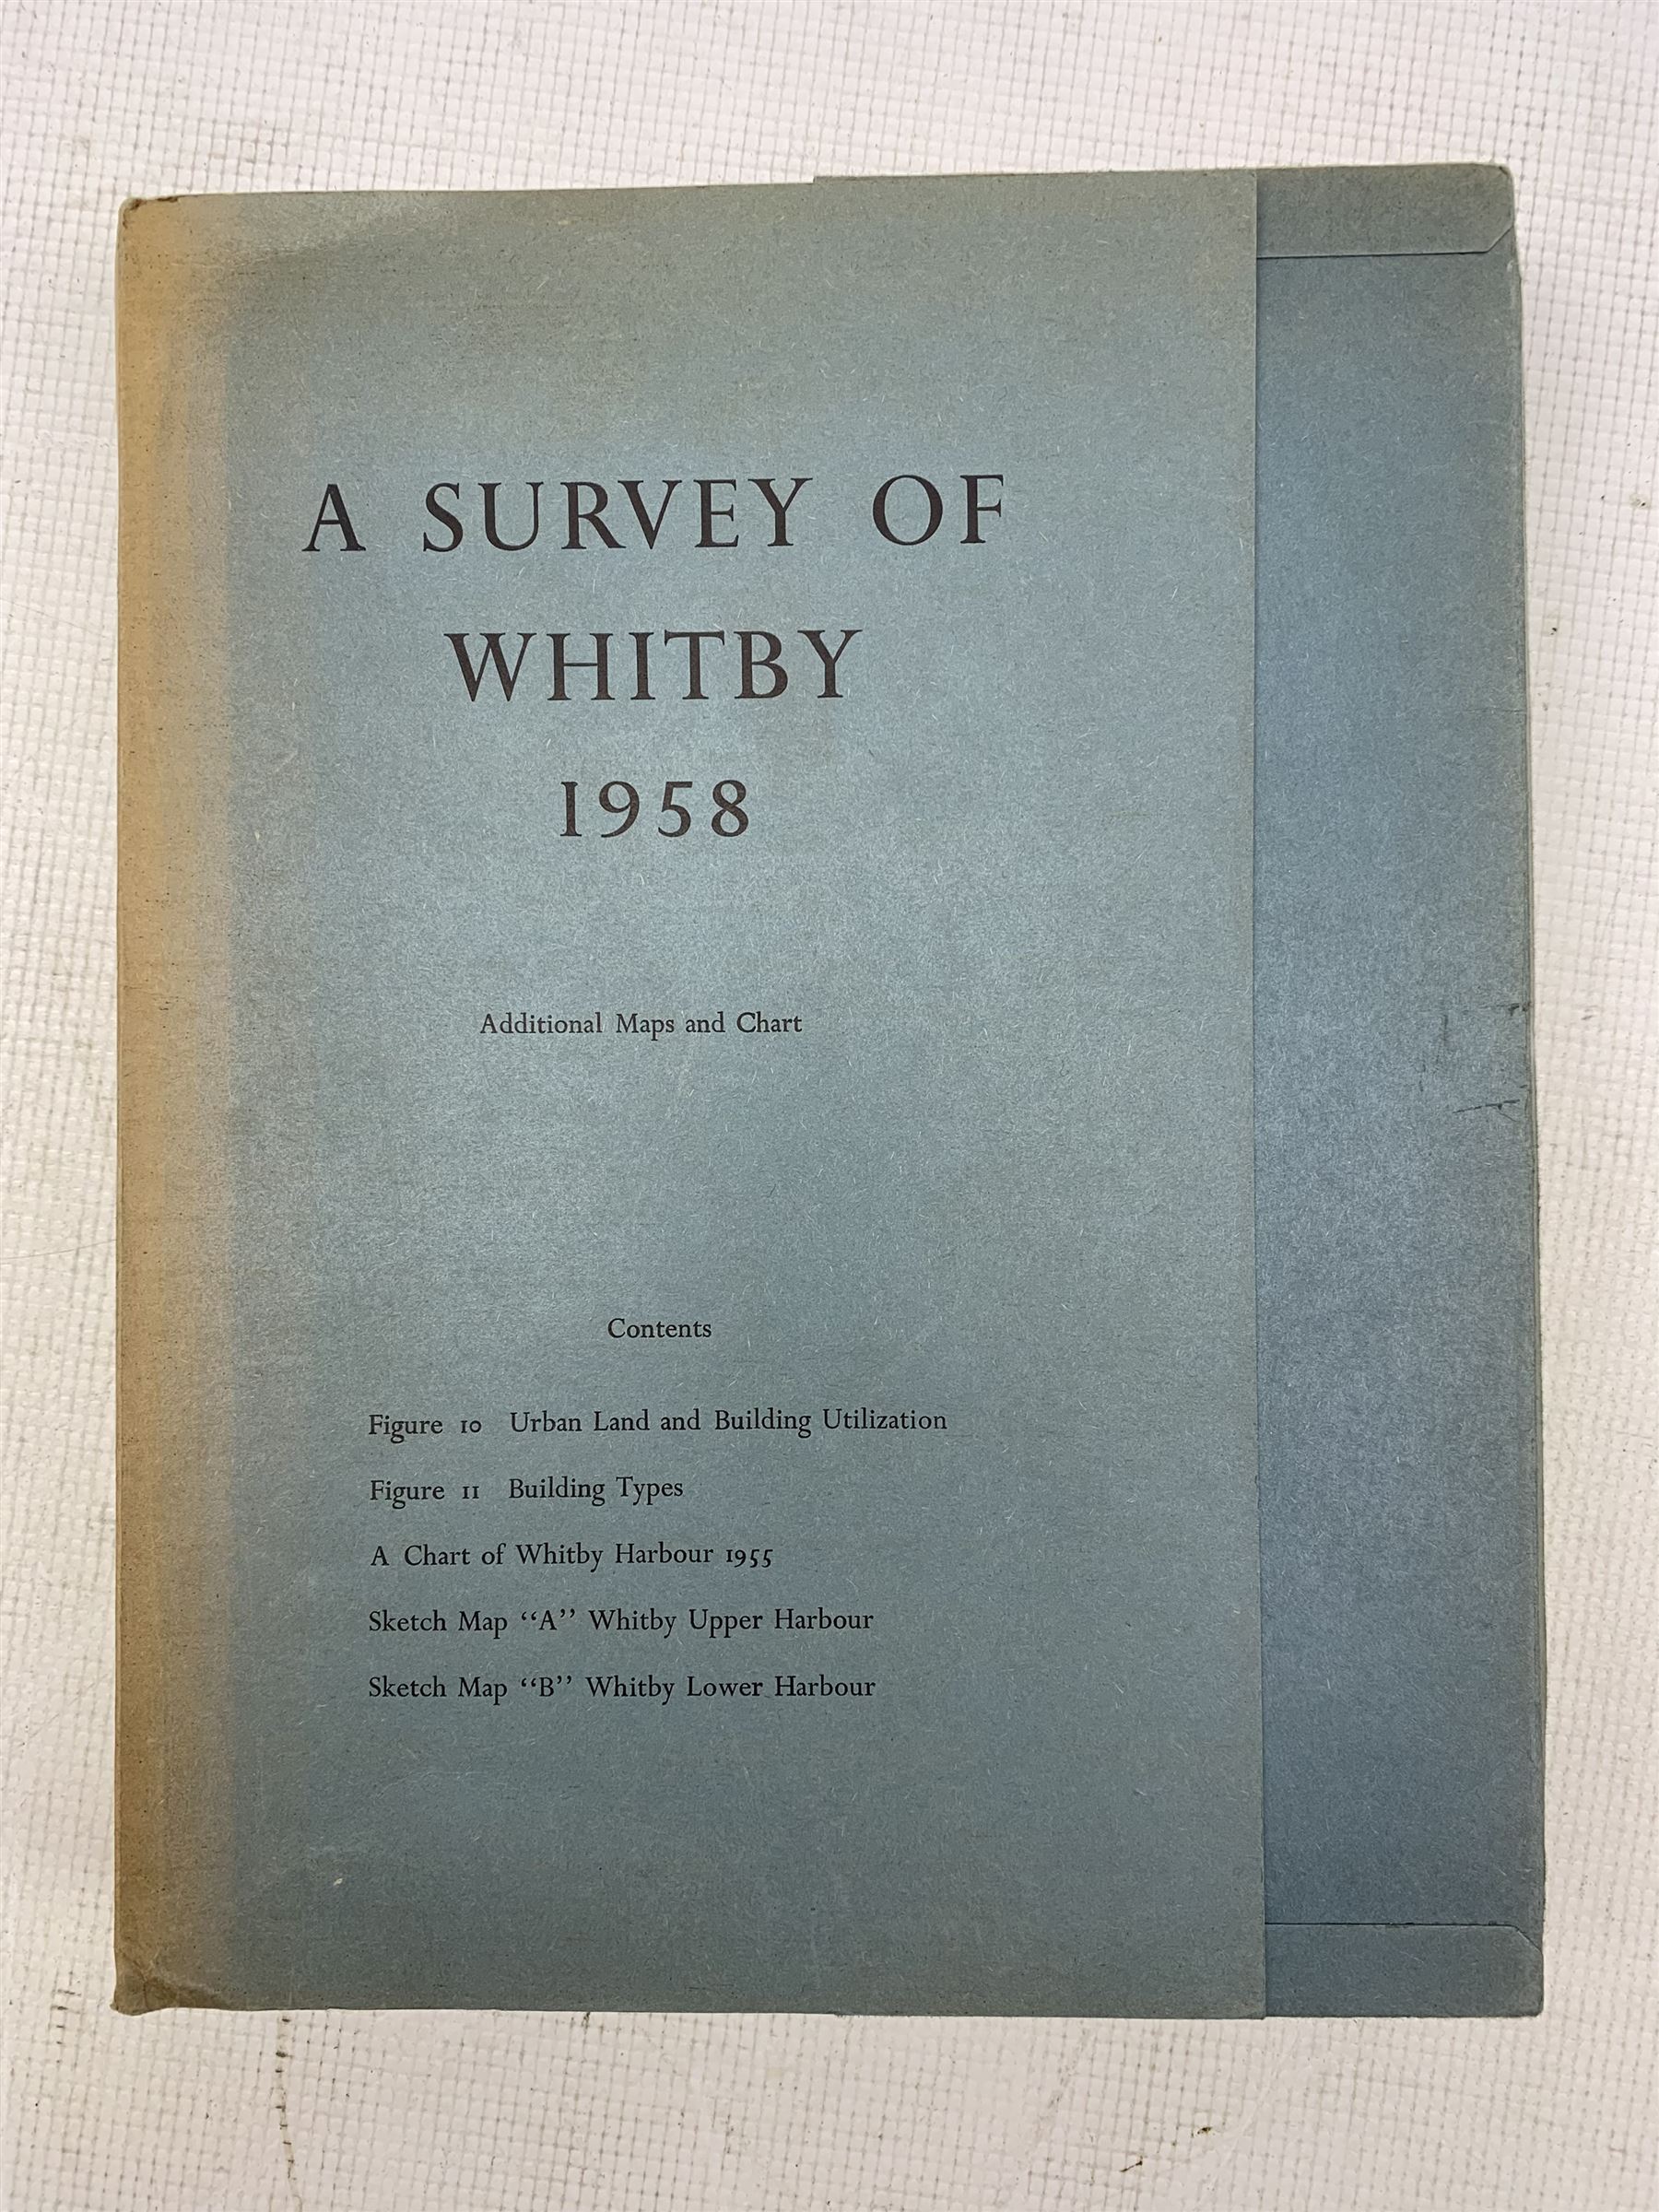 G.H.J.Daysh - A Survey of Whitby and the Surrounding Area - Image 3 of 4